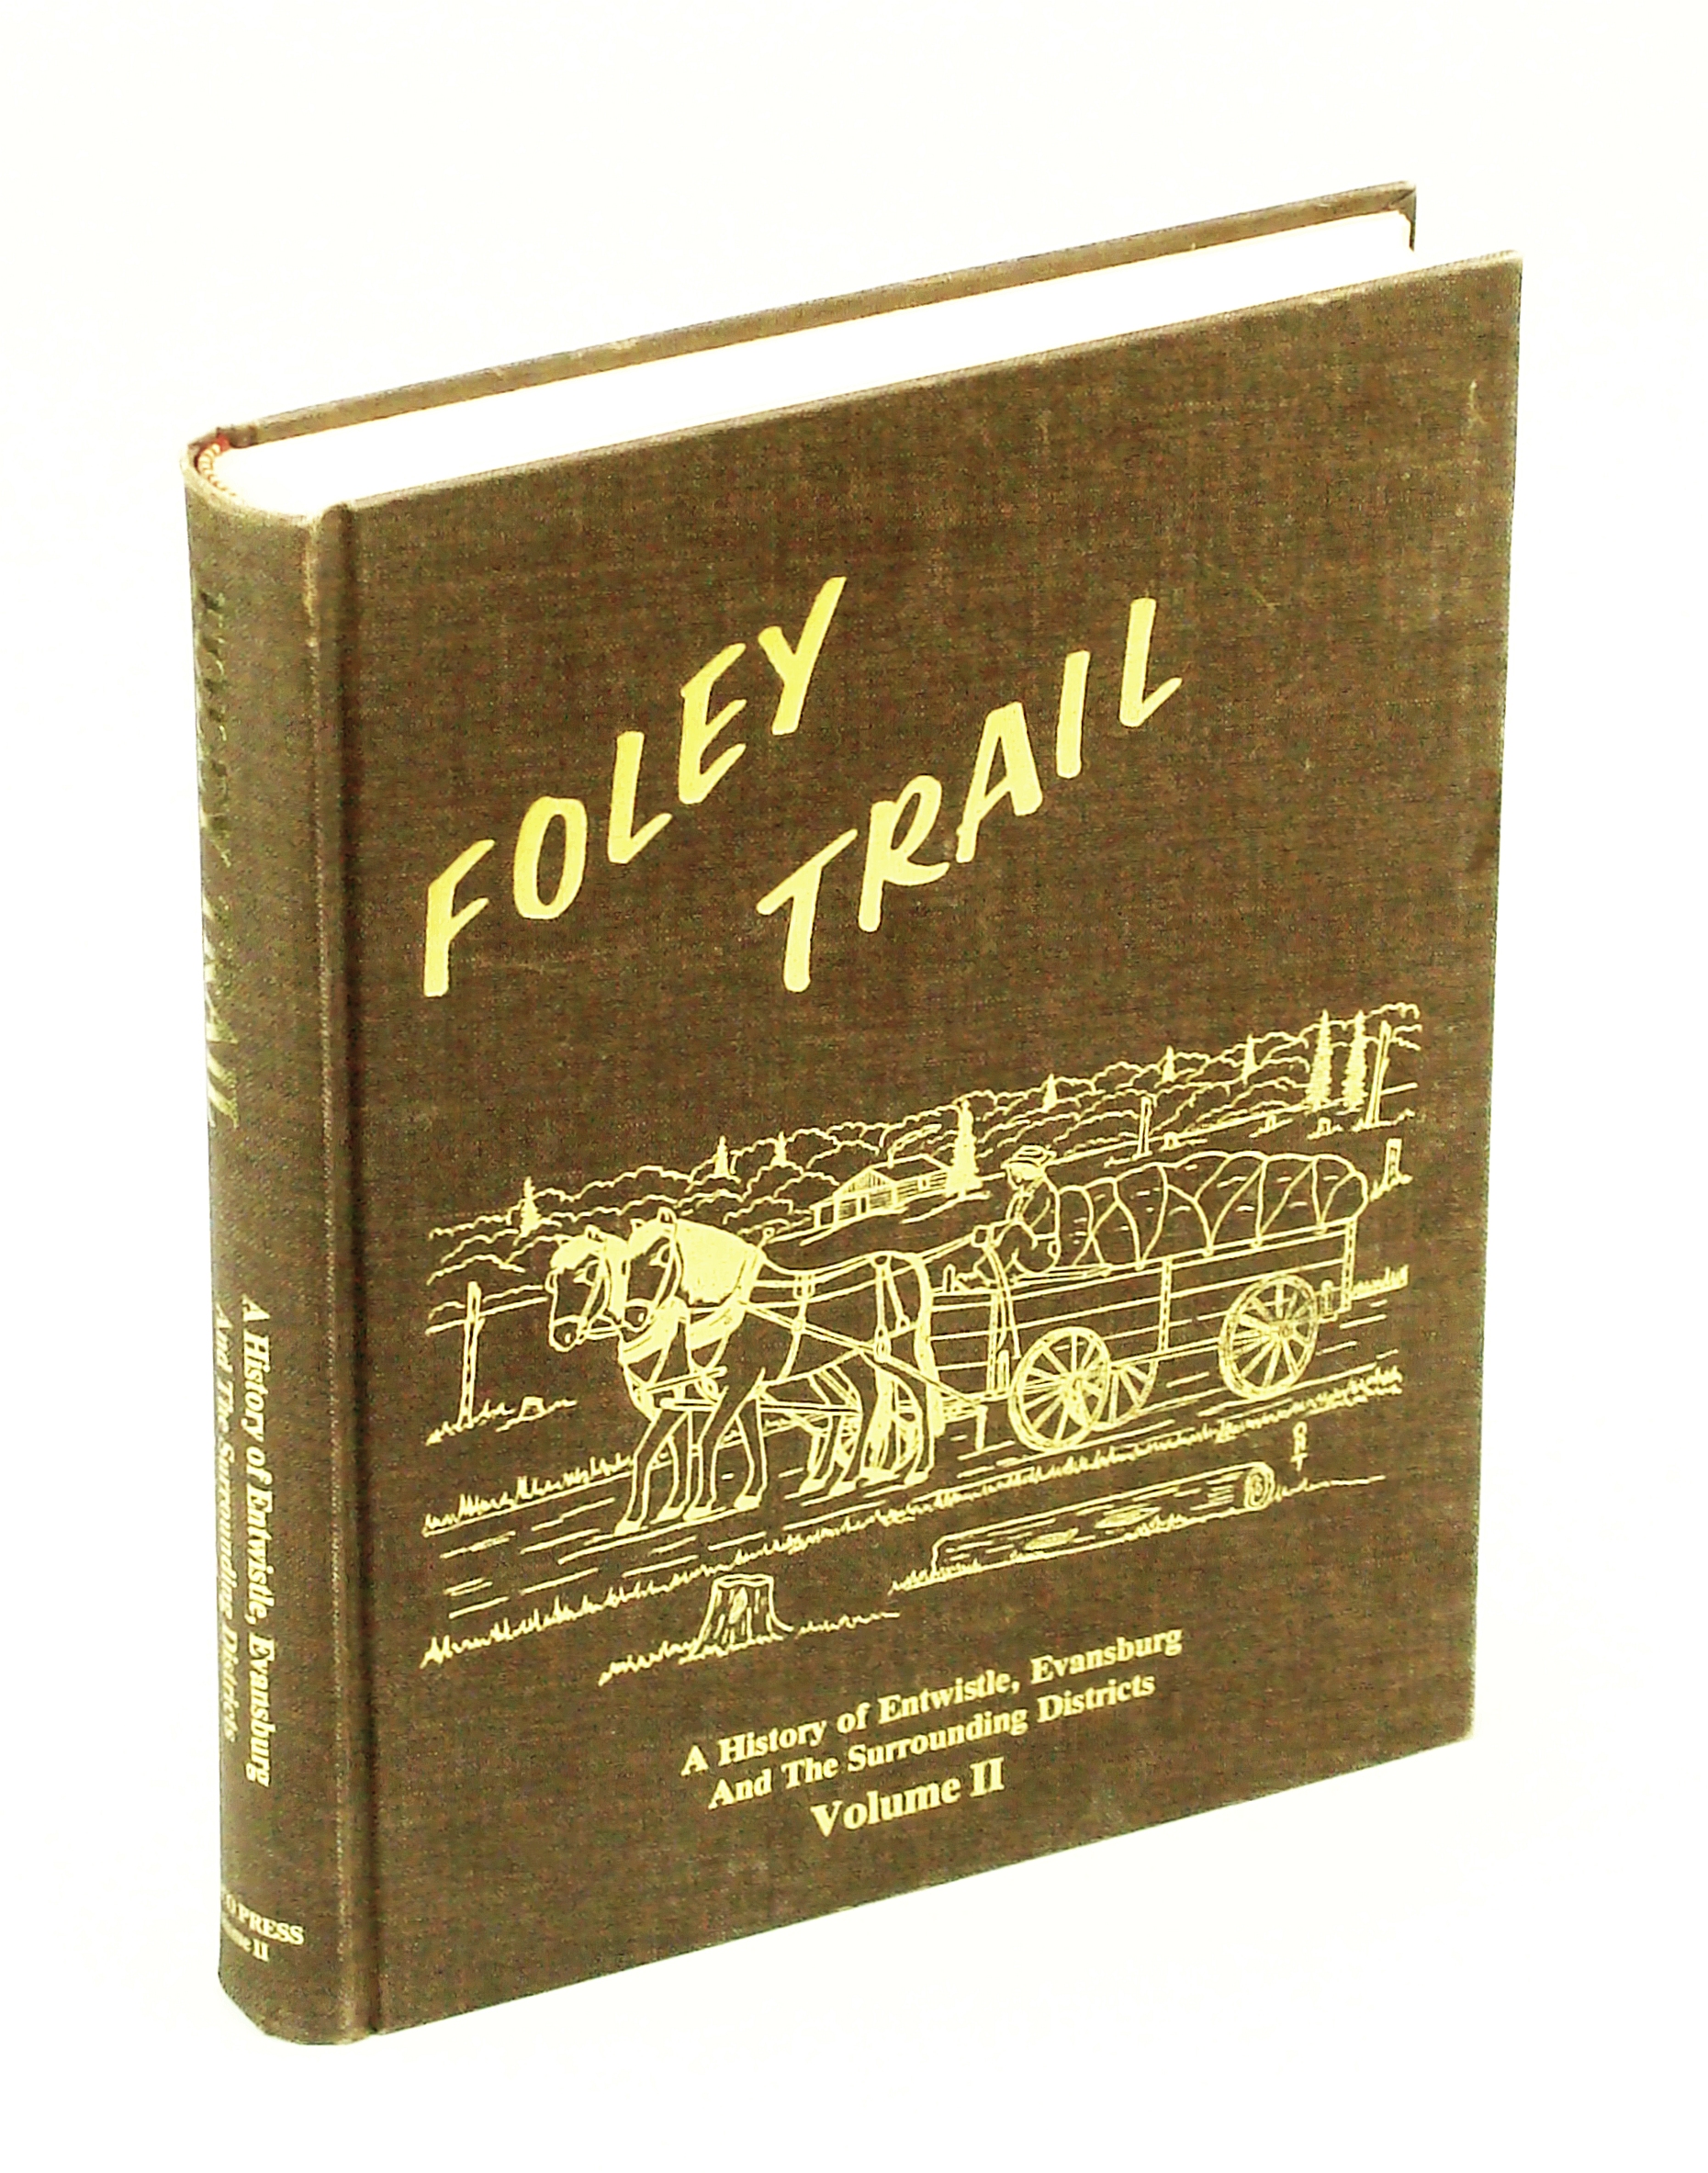 Image for Foley Trail: A History of Entwistle, Evansburg and the Surrounding Districts, Volume II [Alberta Local History]